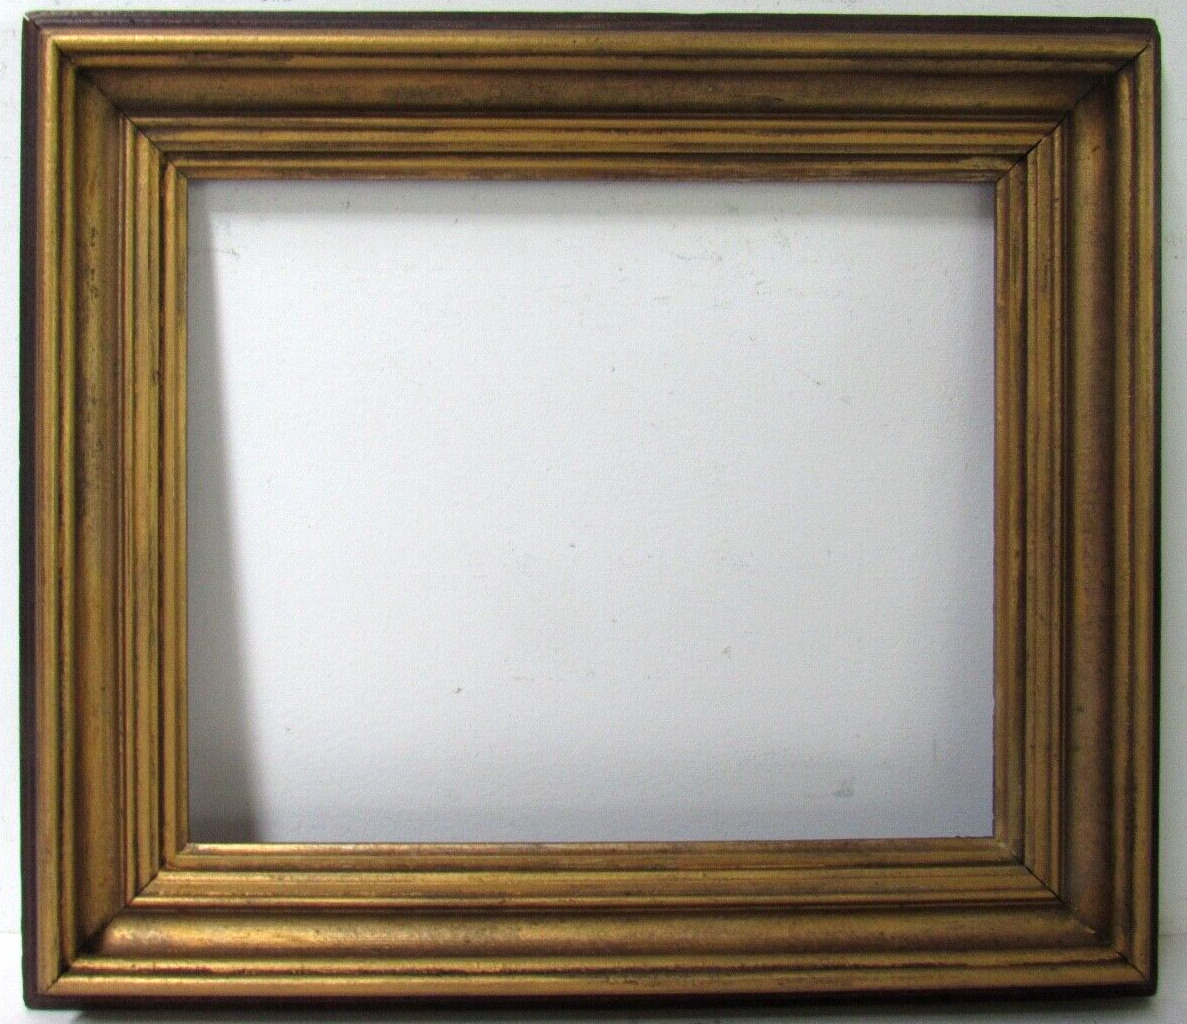 ANTIQUE WOOD GILDED FRAME FOR PAINTING  11 1/2 X 9 1/2 INCH  (c-53)